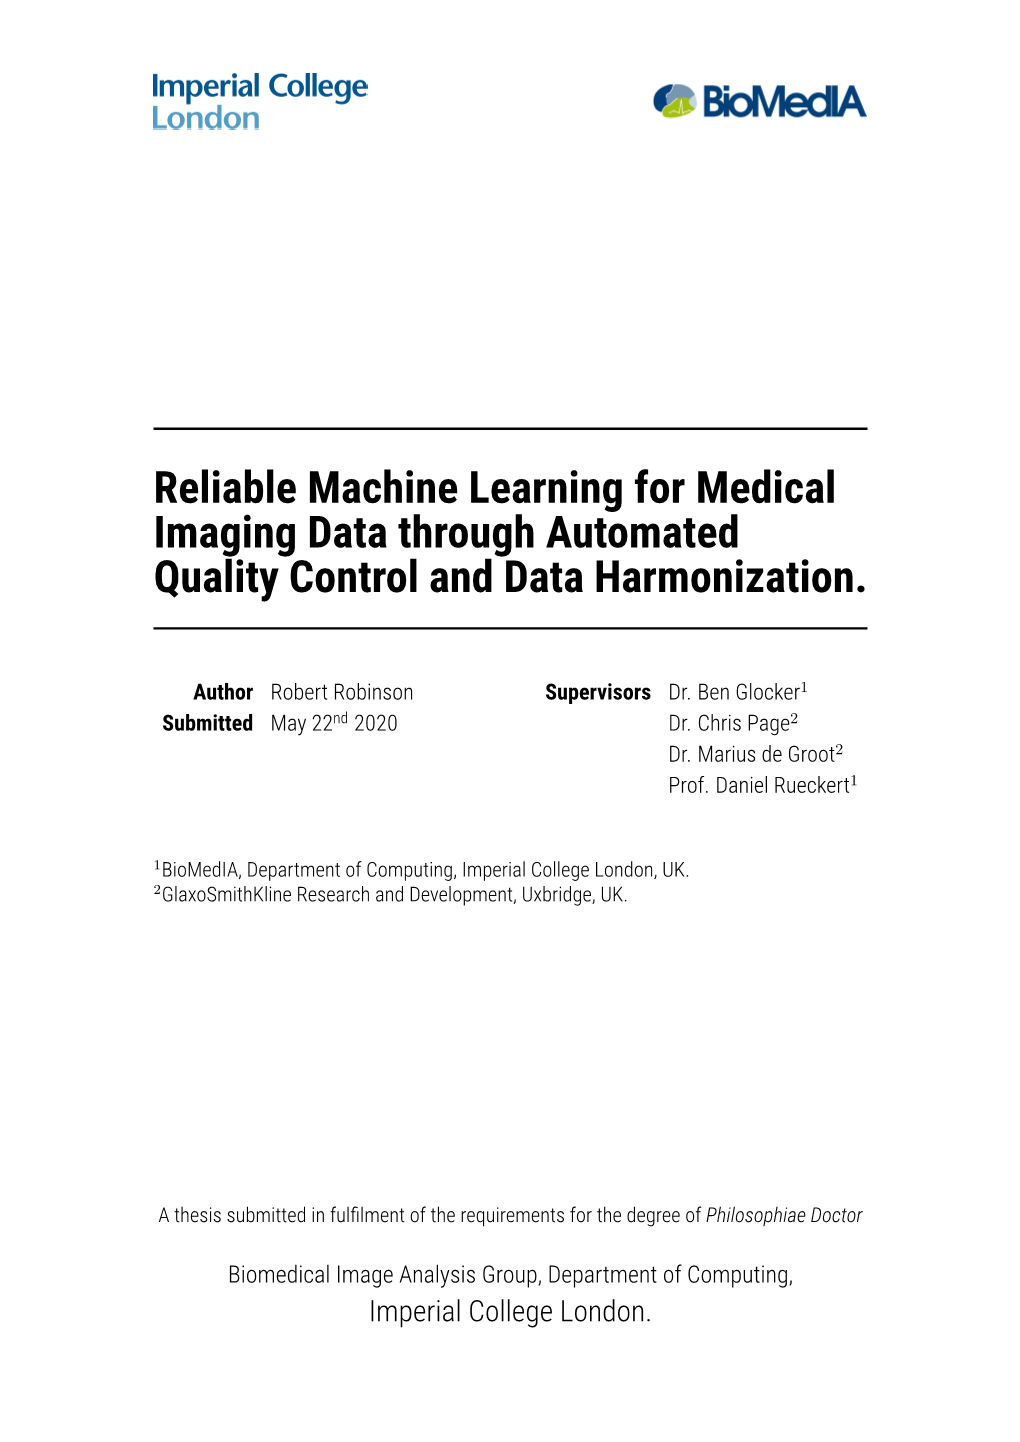 Reliable Machine Learning for Medical Imaging Data Through Automated Quality Control and Data Harmonization